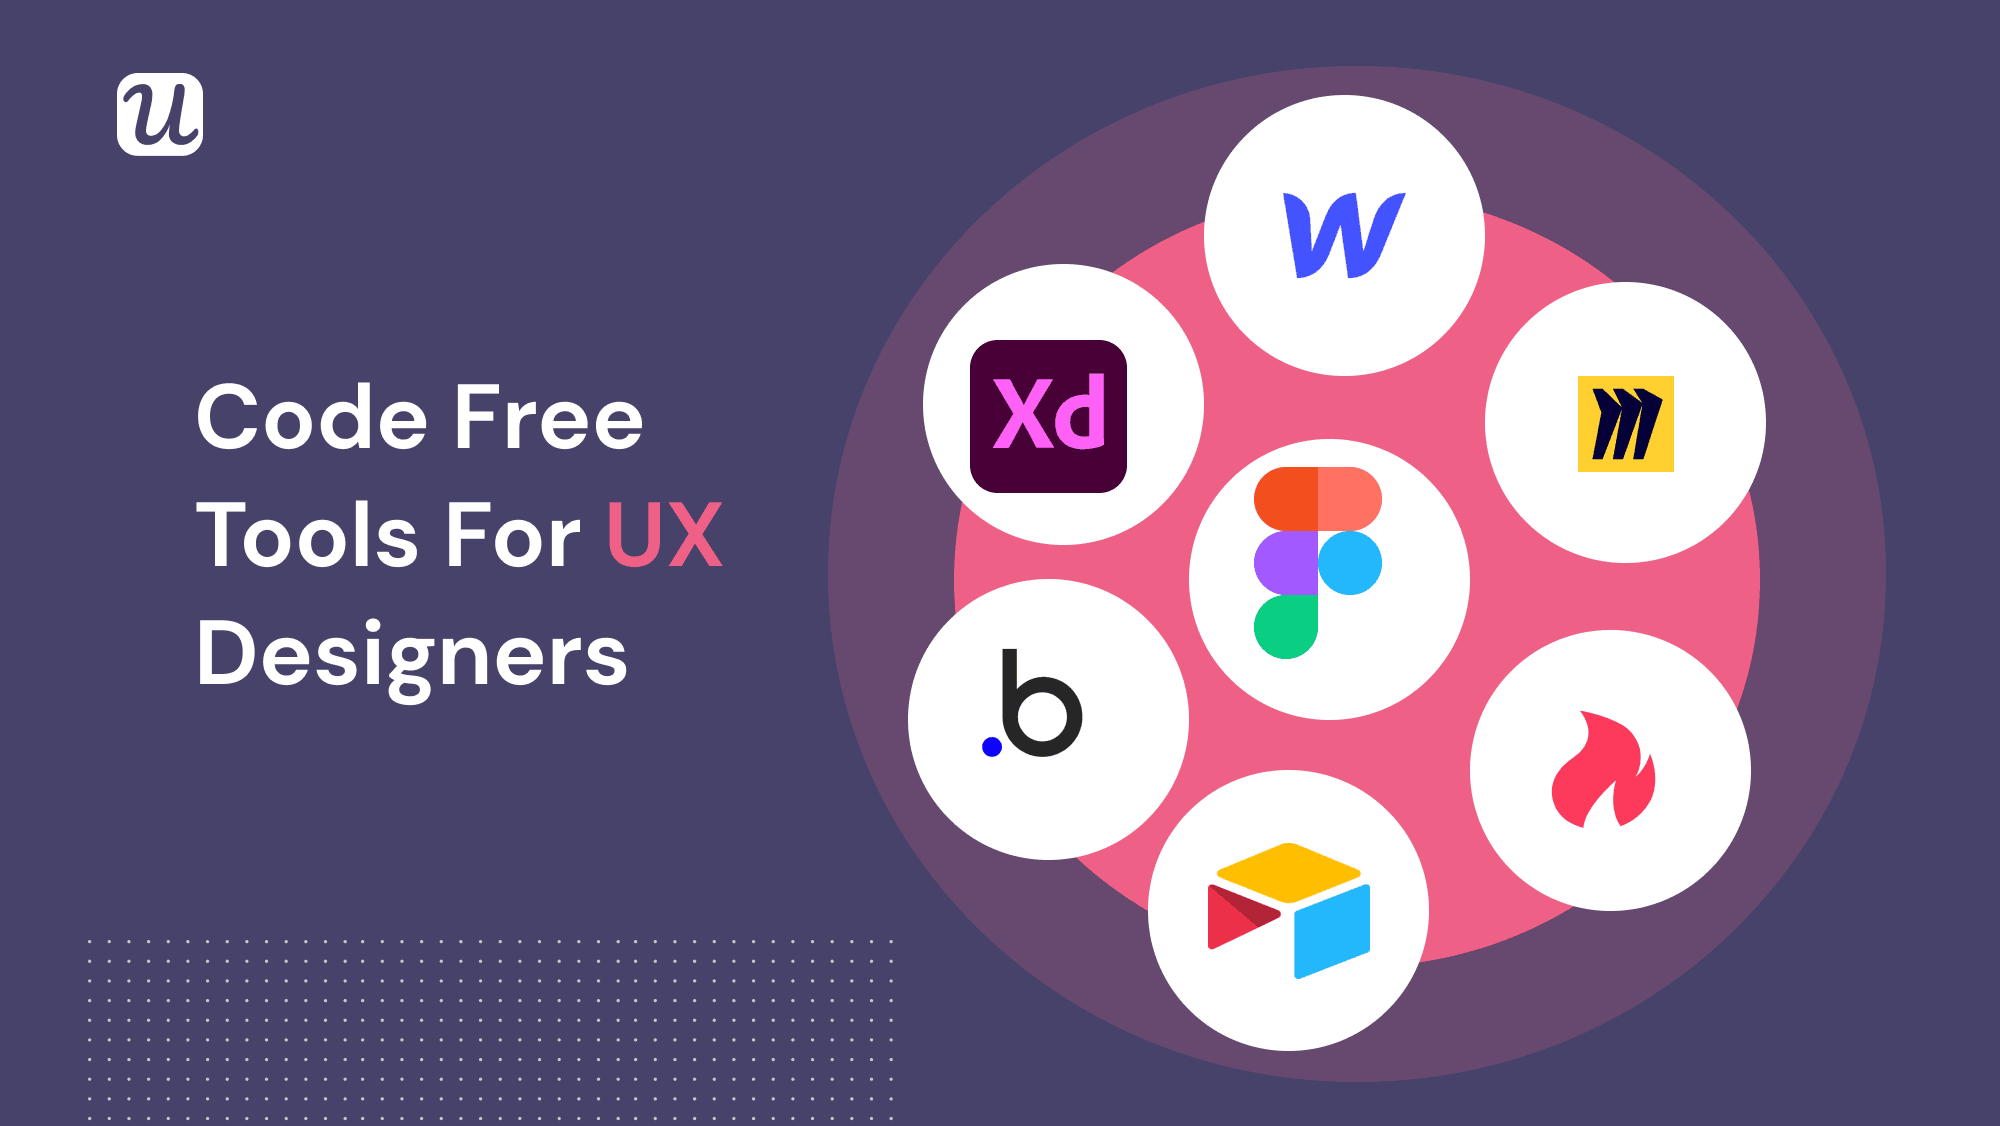 The Only Guide to Code Free Tools for UX Design You’ll Ever Need